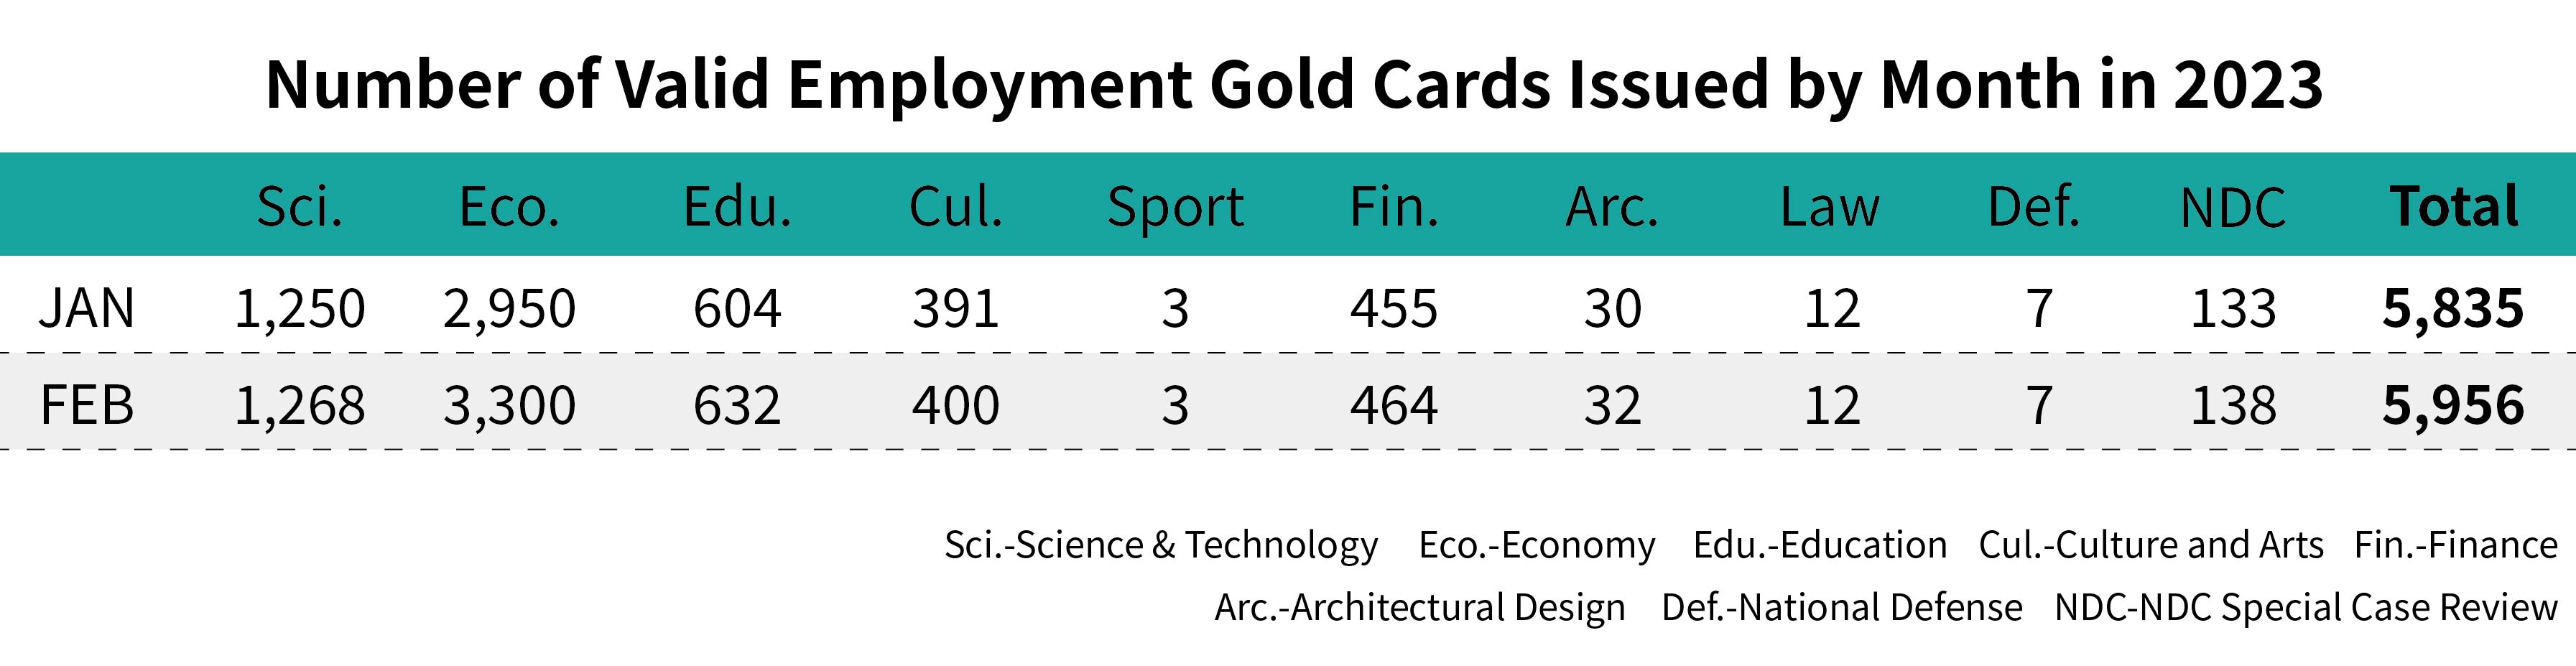 Number of Valid Employment Gold Cards Issued by Month-February